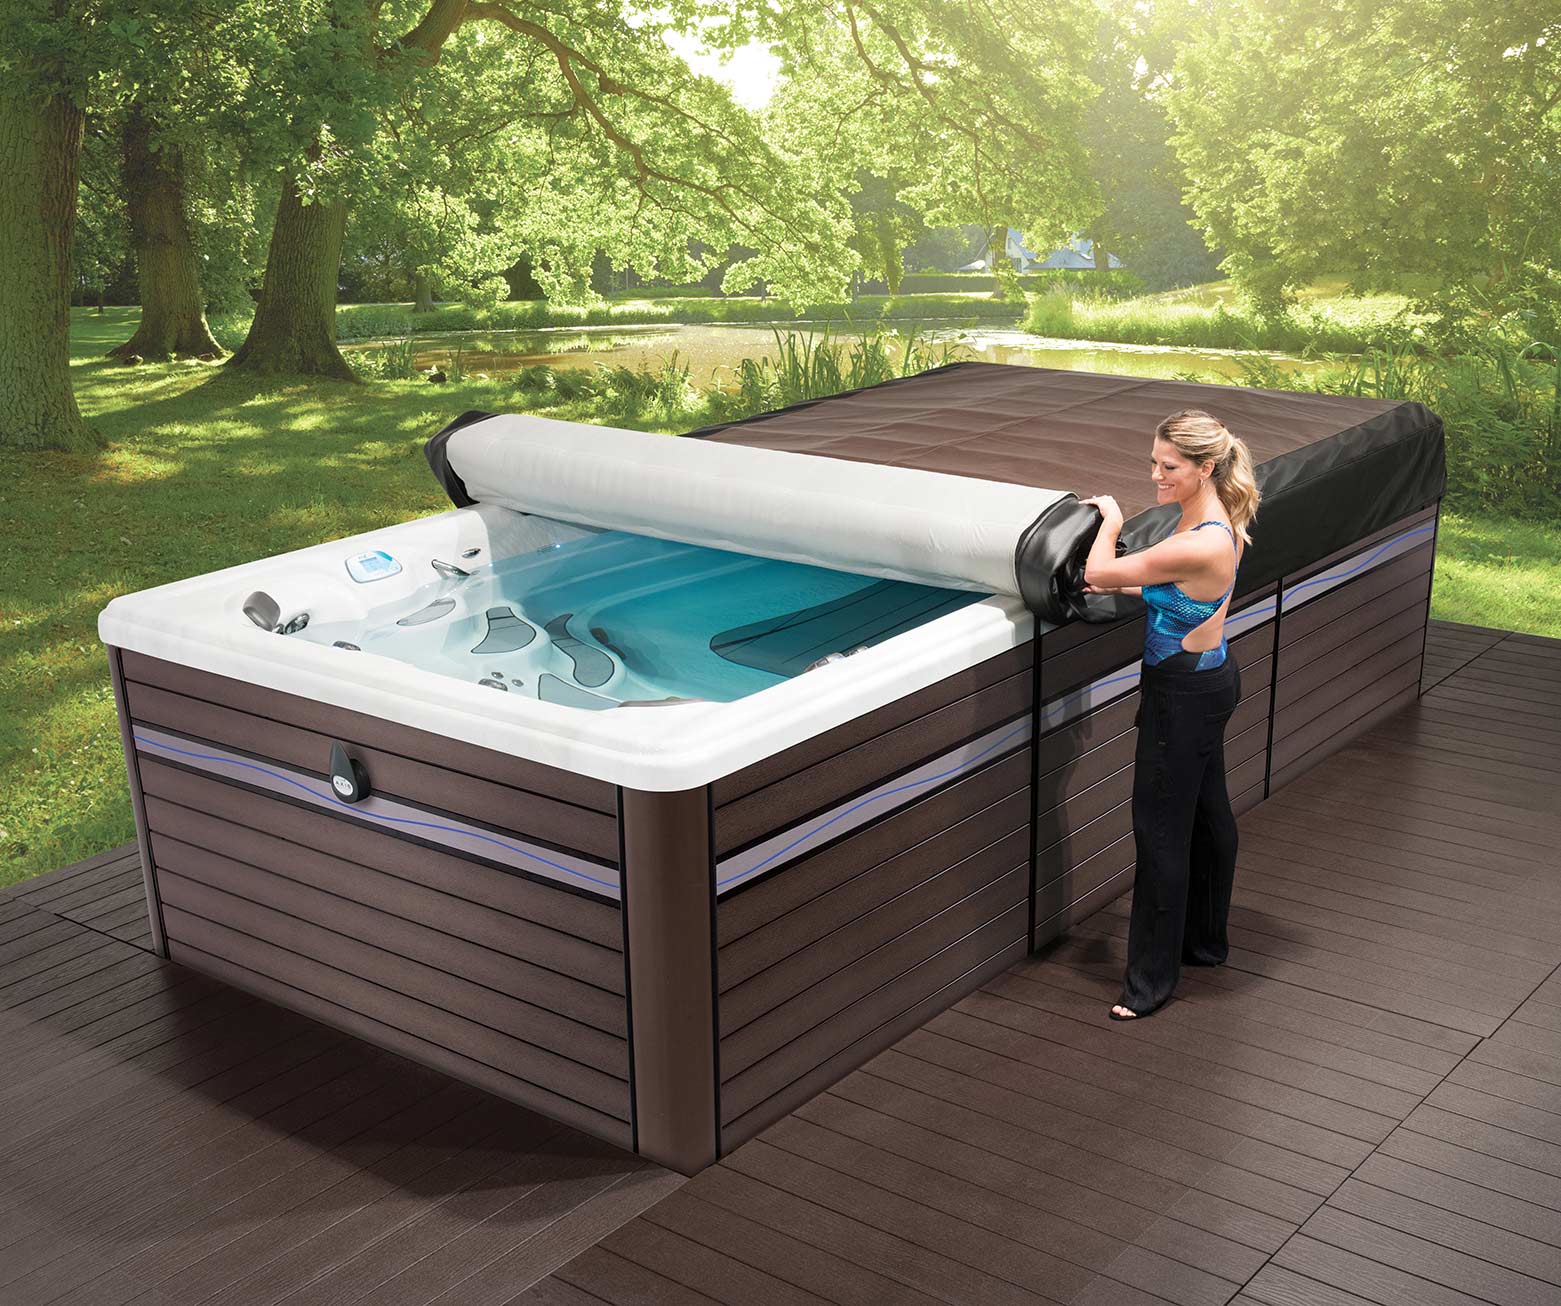 Unrolling the axis cover system on a master spas swim spa